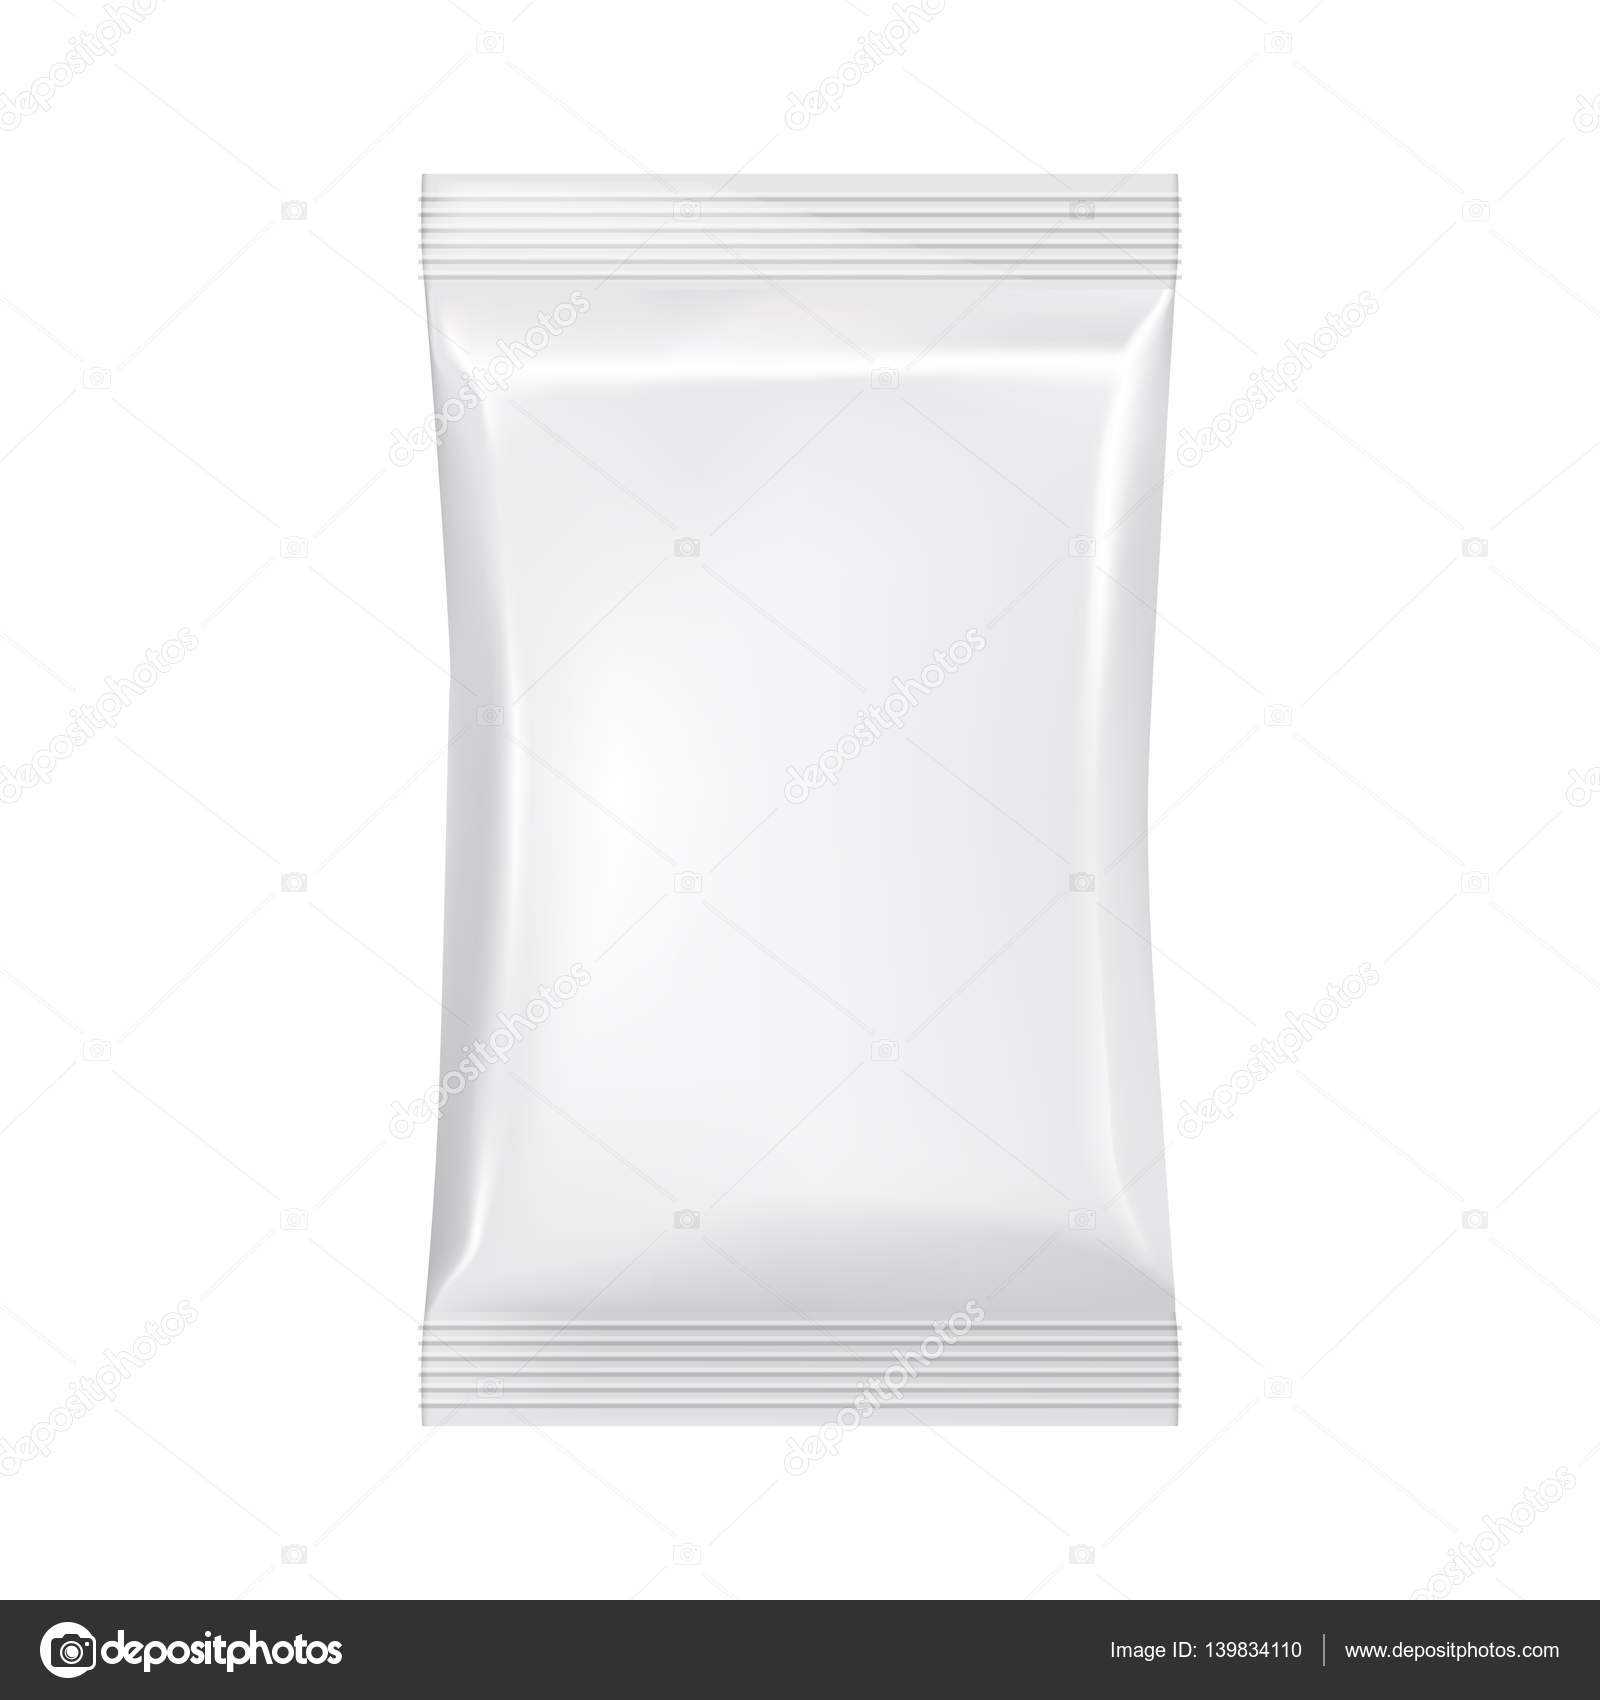 Blank Packaging Template Mockup Isolated On White. — Stock Regarding Blank Packaging Templates